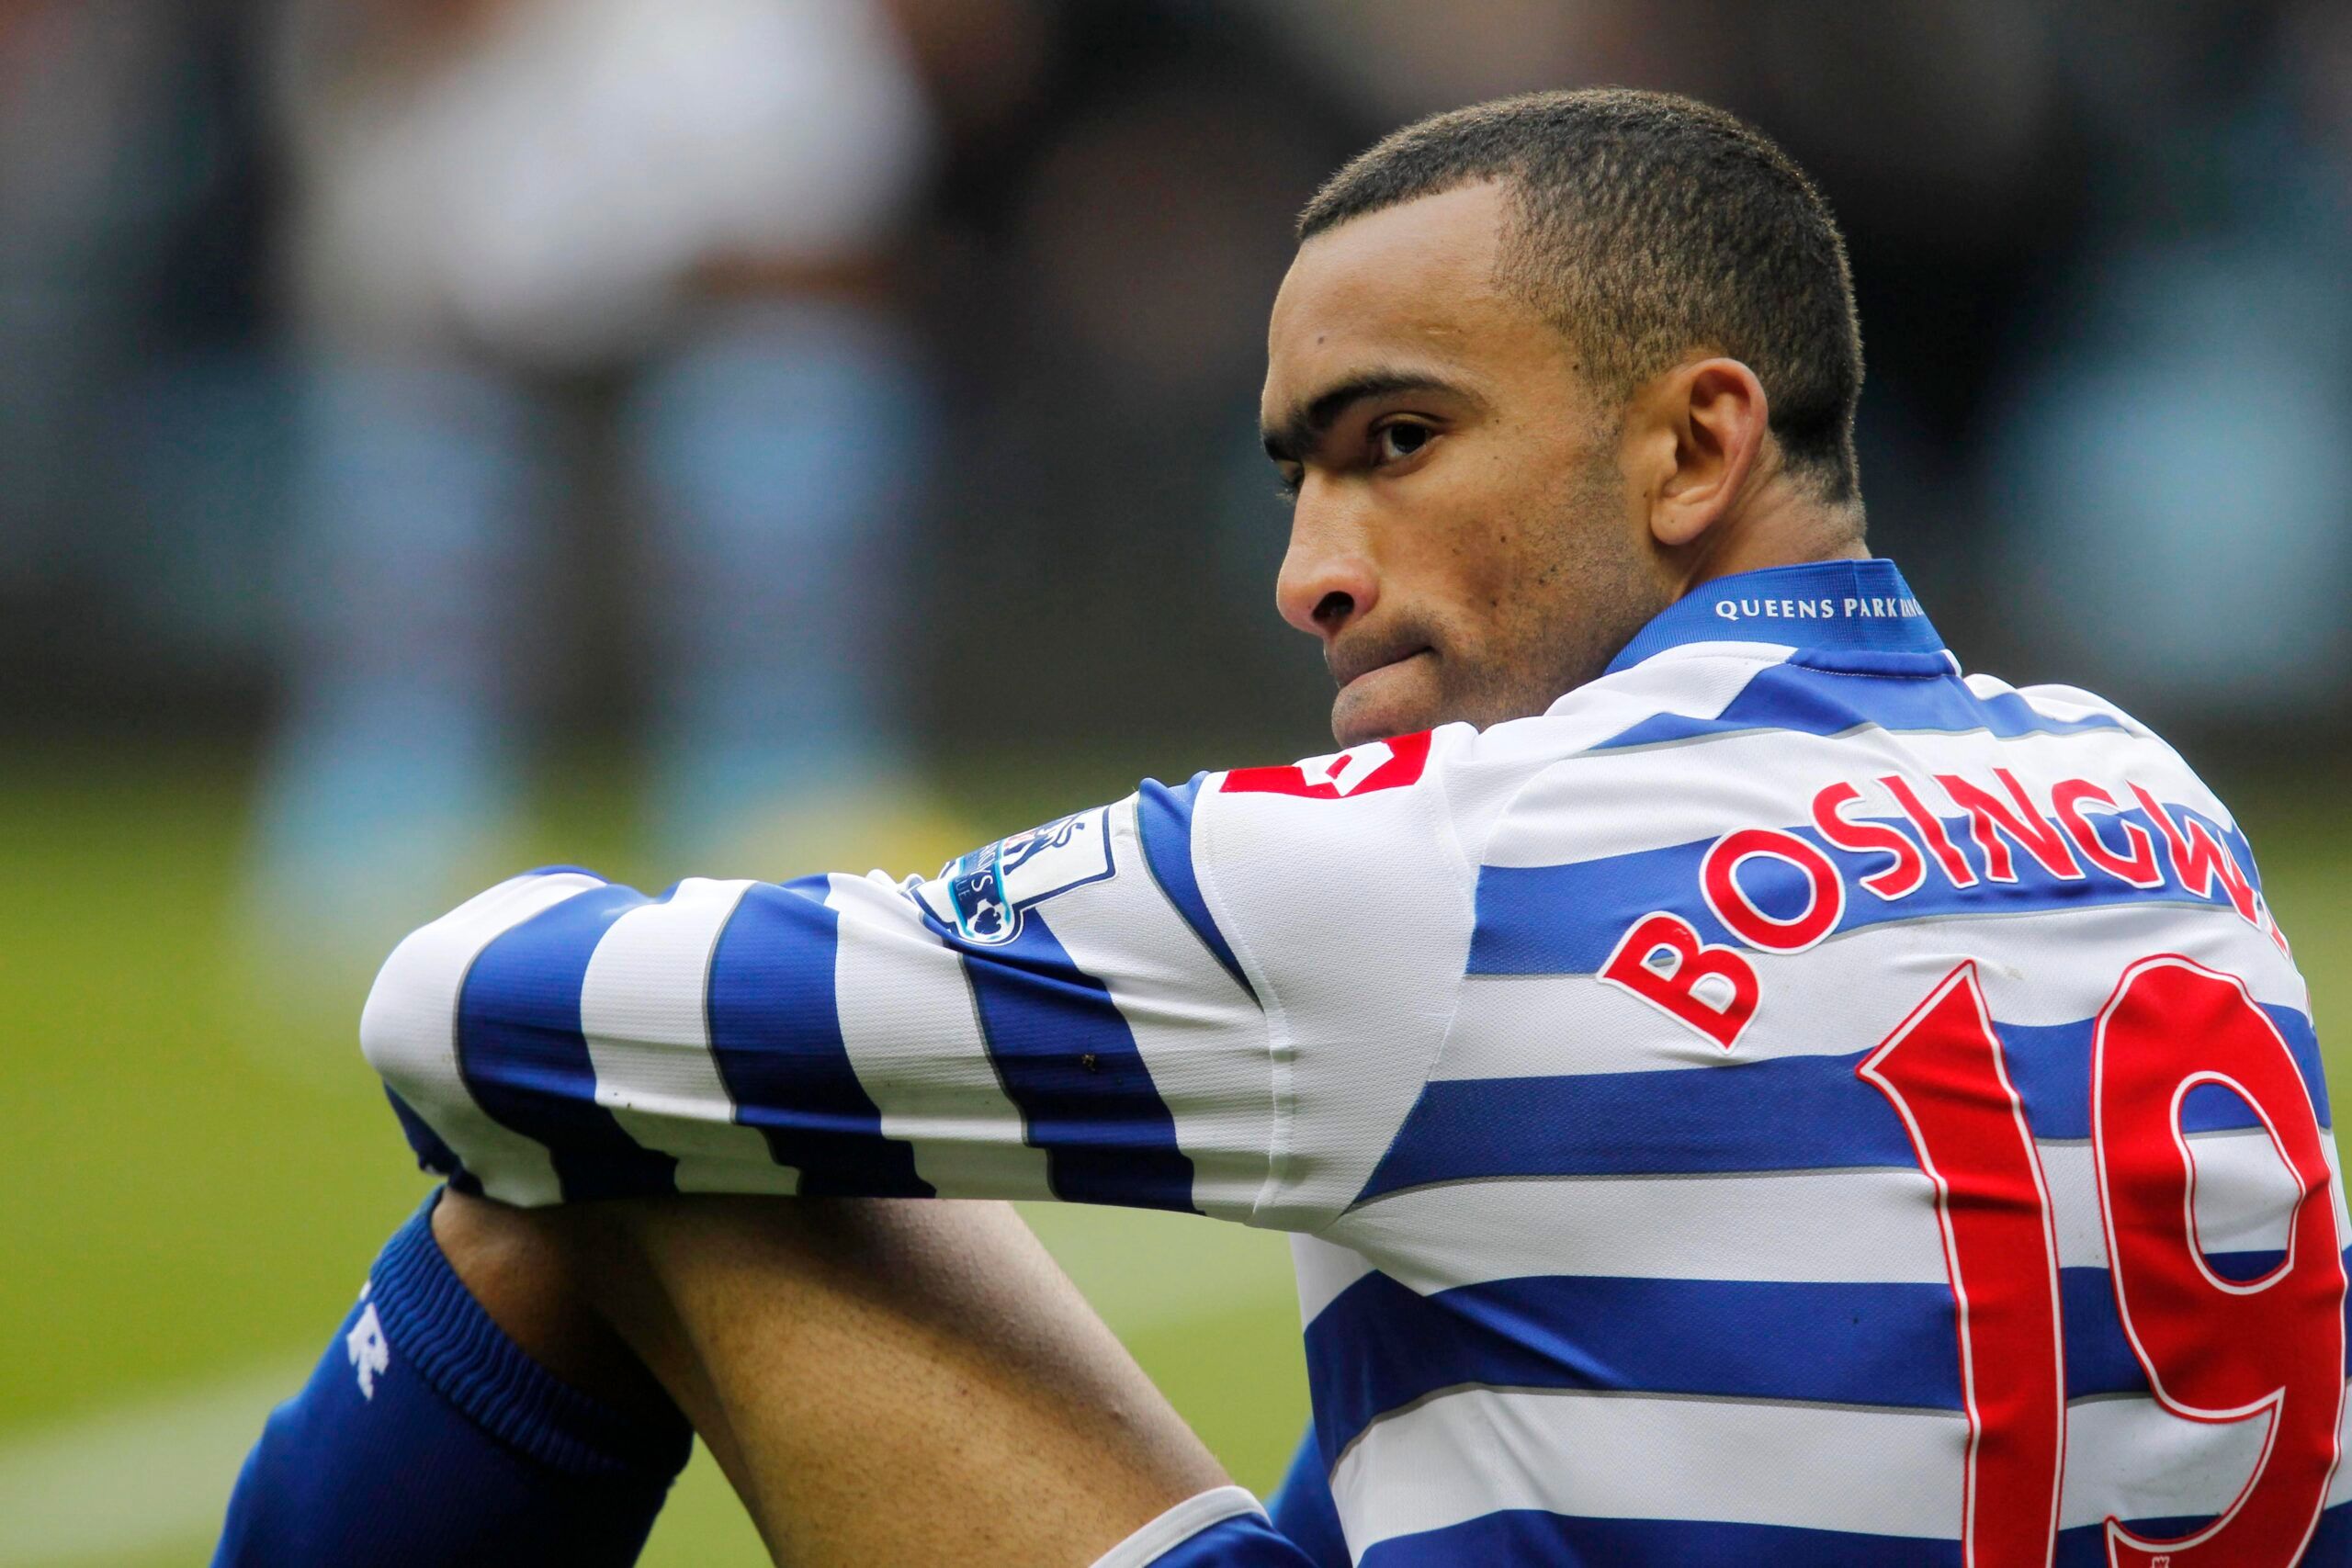 Football - Aston Villa v Queens Park Rangers - Barclays Premier League - Villa Park - 16/3/13 
QPR's Jose Bosingwa looks dejected at full time 
Mandatory Credit: Action Images / Jed Leicester 
Livepic 
EDITORIAL USE ONLY. No use with unauthorized audio, video, data, fixture lists, club/league logos or live services. Online in-match use limited to 45 images, no video emulation. No use in betting, games or single club/league/player publications.  Please contact your account representative for furt